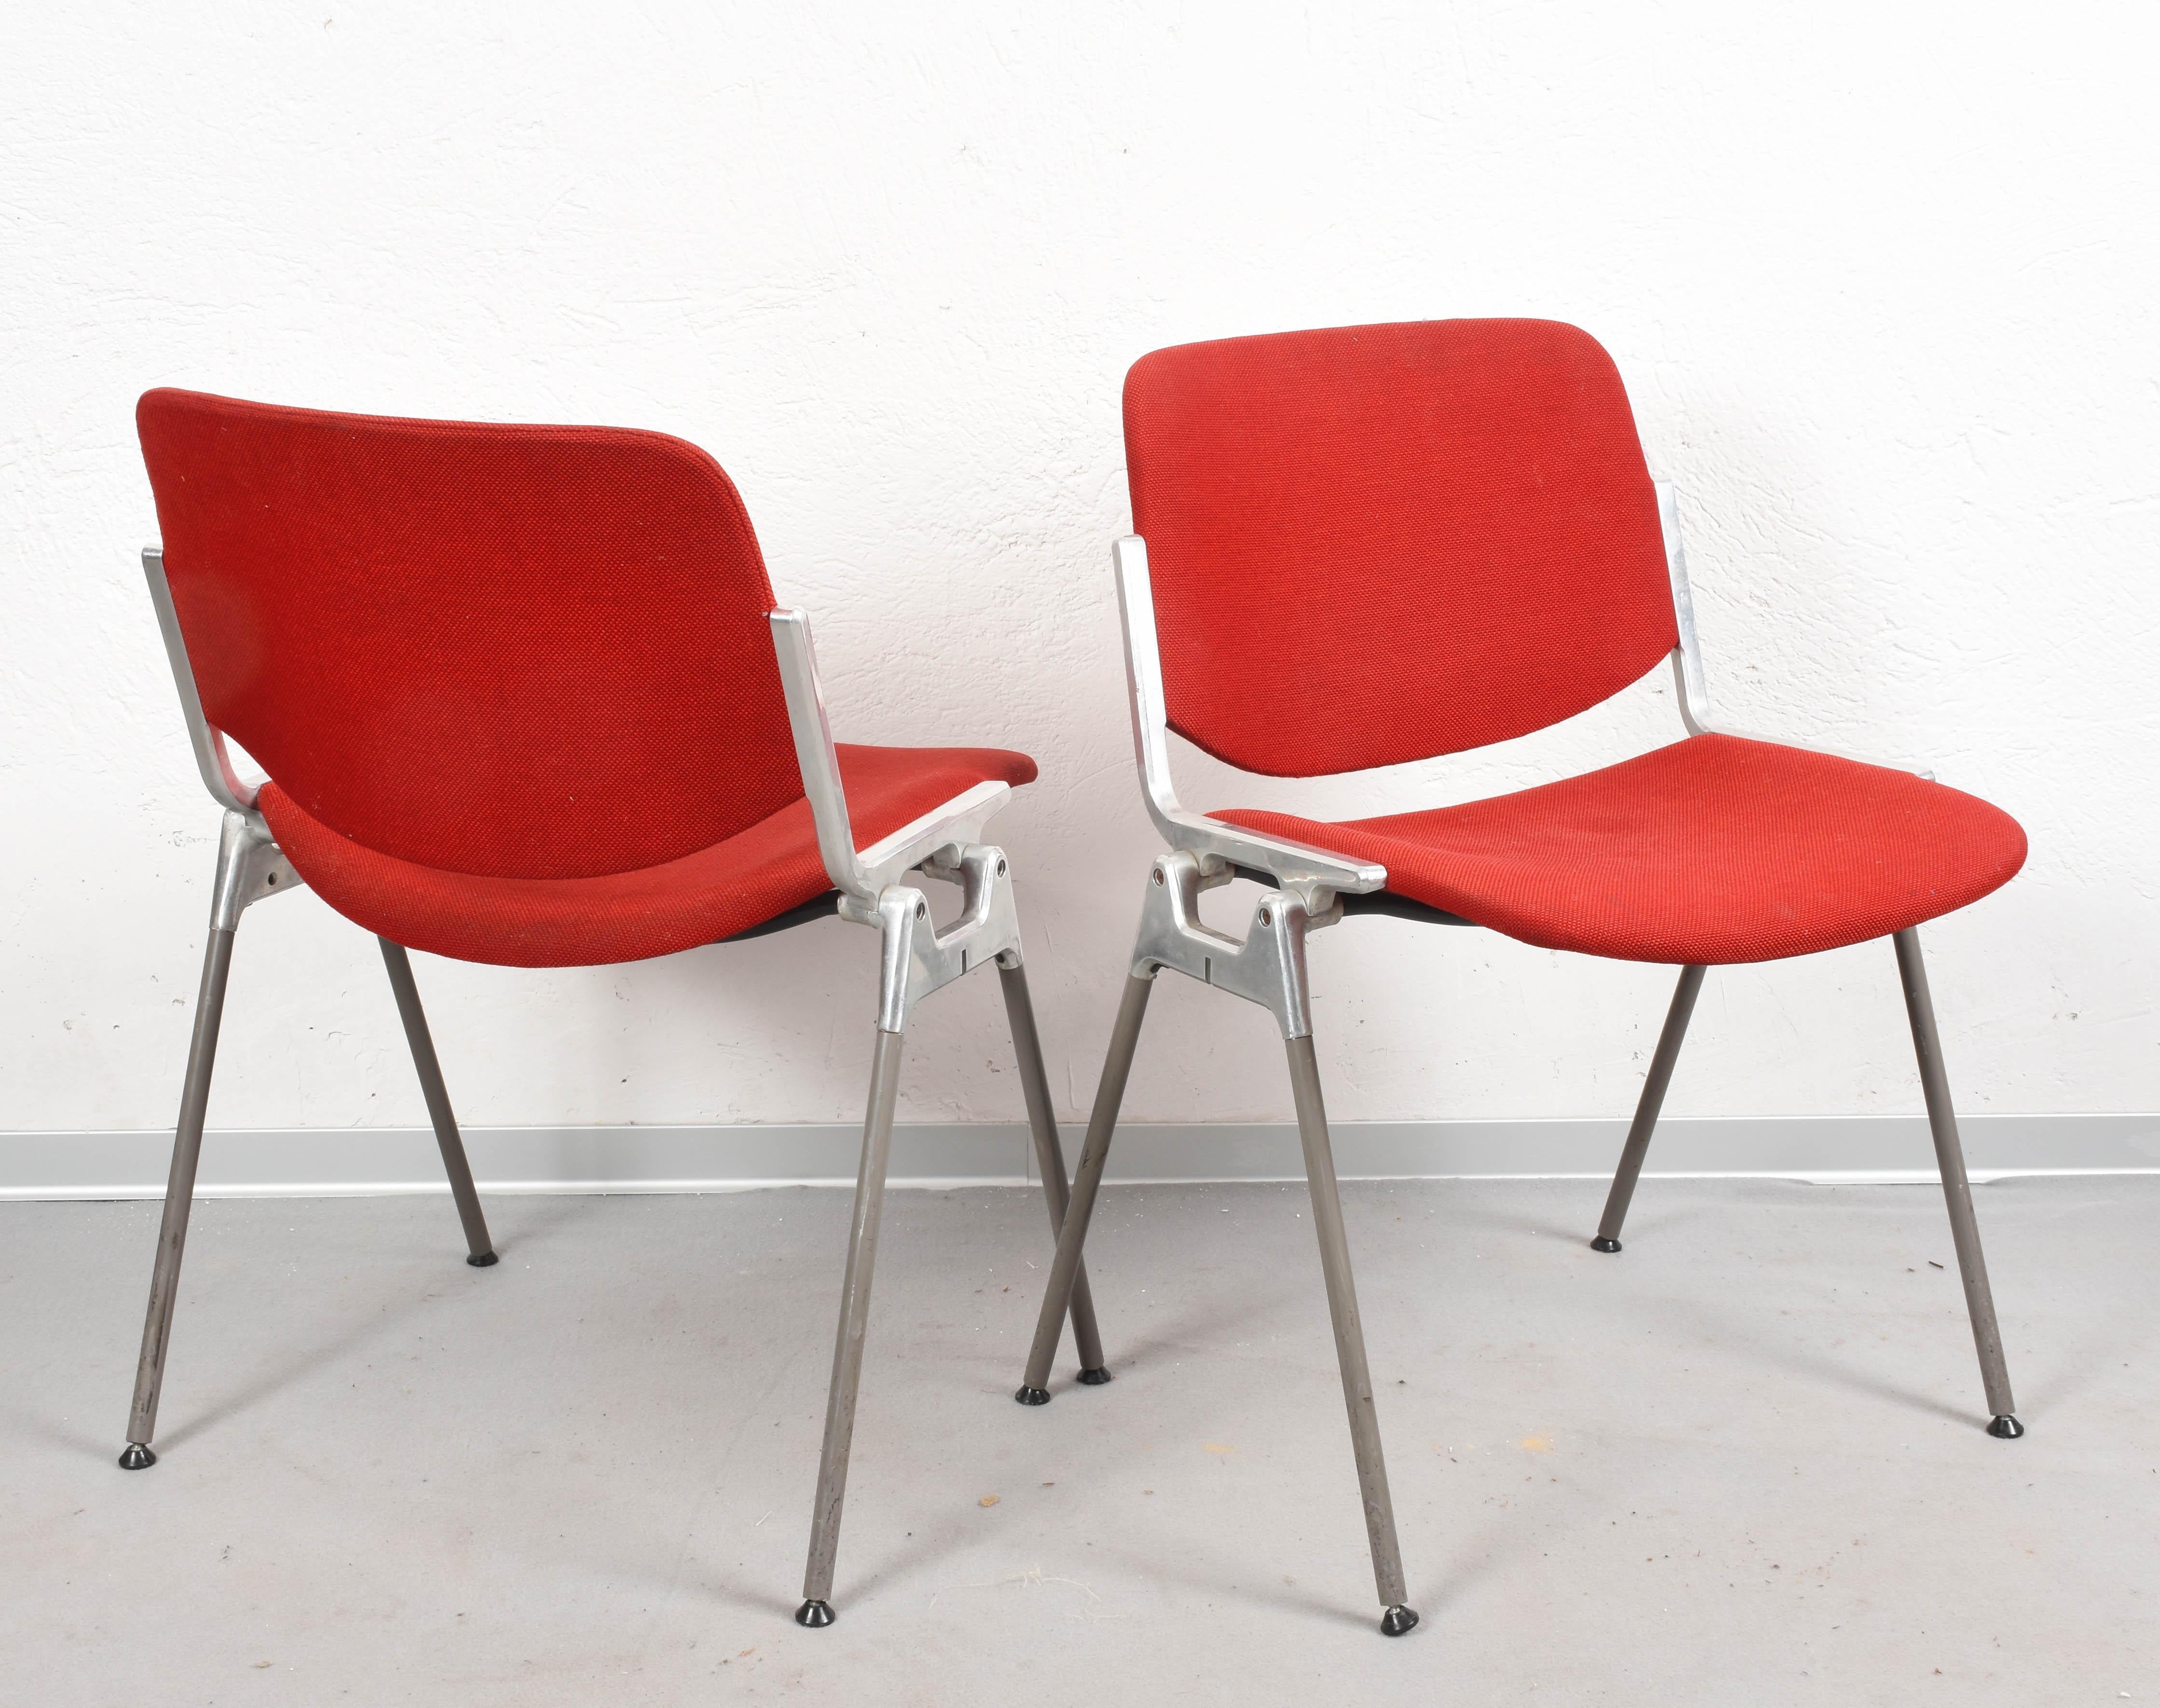 Beautiful and rare pair of chairs designed by Giancarlo Piretti for Castelli. Seat and back in red fabric. Stackable chairs
Eternal and indestructible chair.